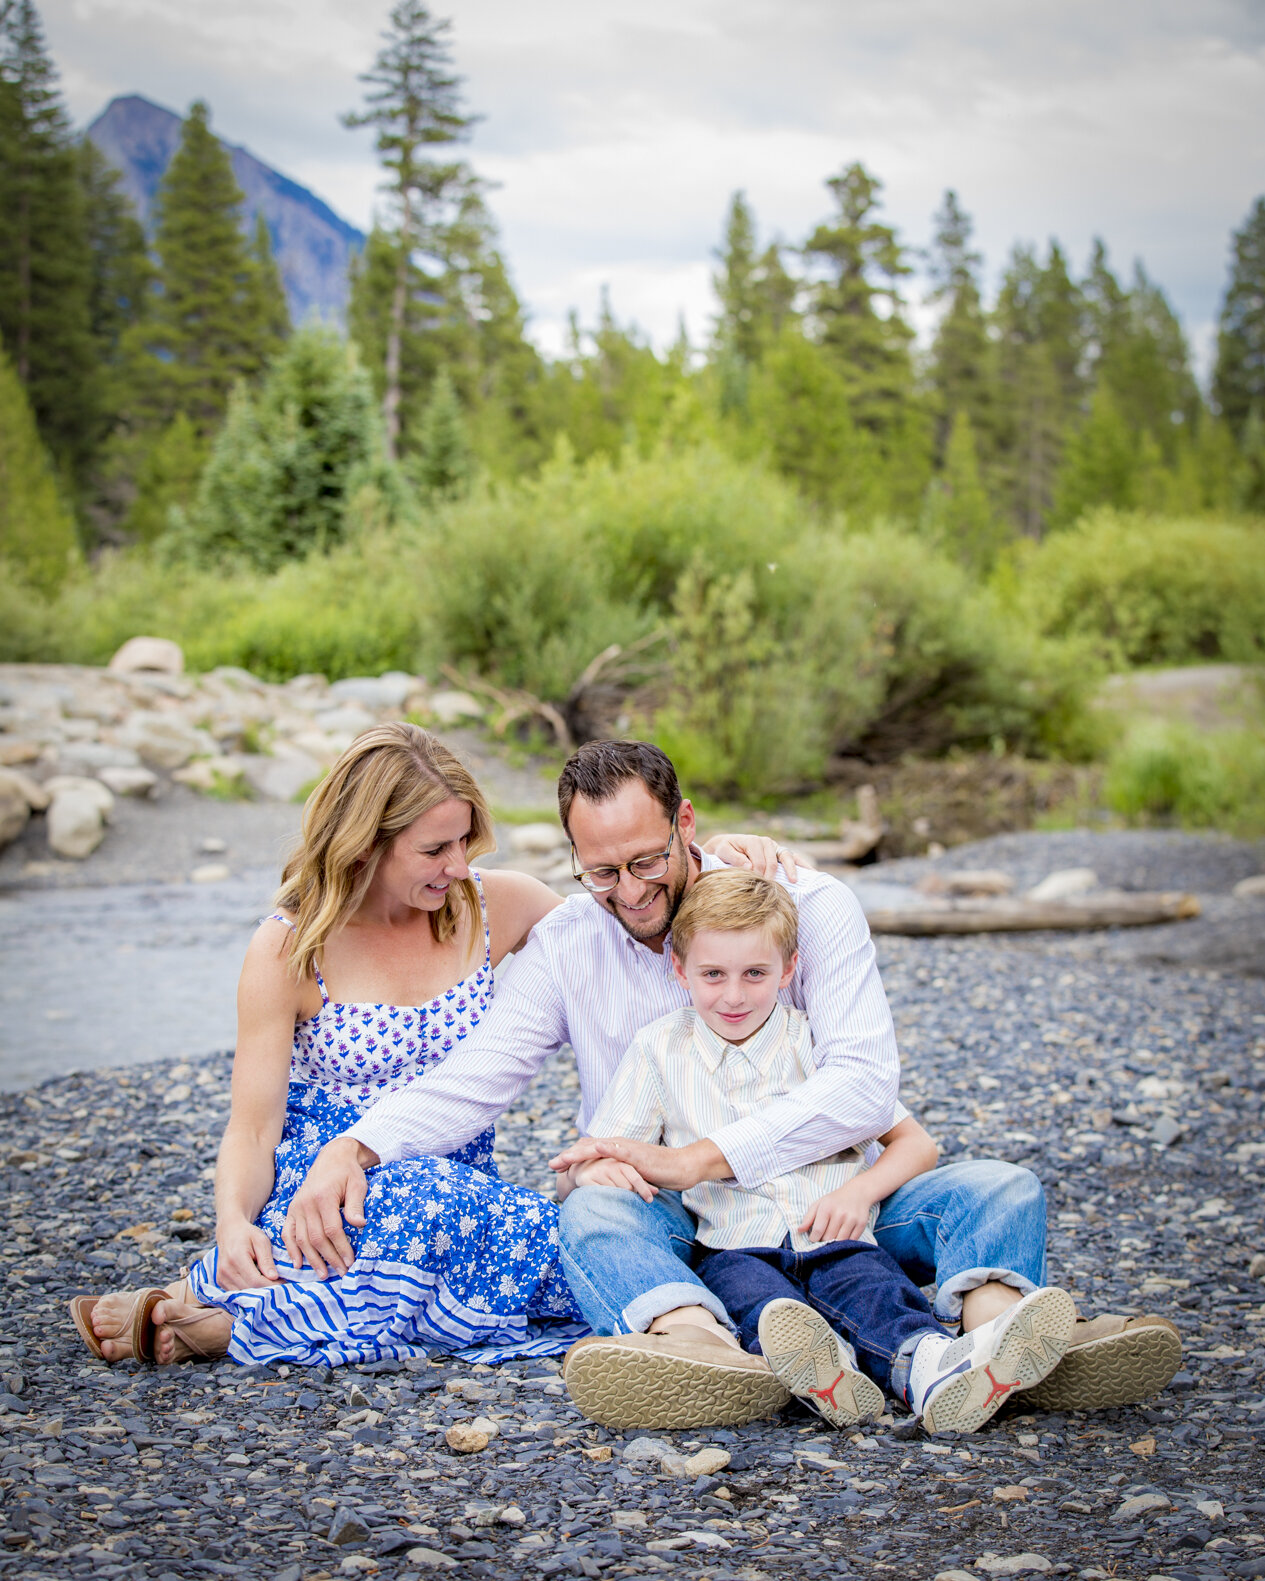 Colorado-Portrait-Family-Photography-Crested-Butte-Wedding-Photographer-3-10.jpg